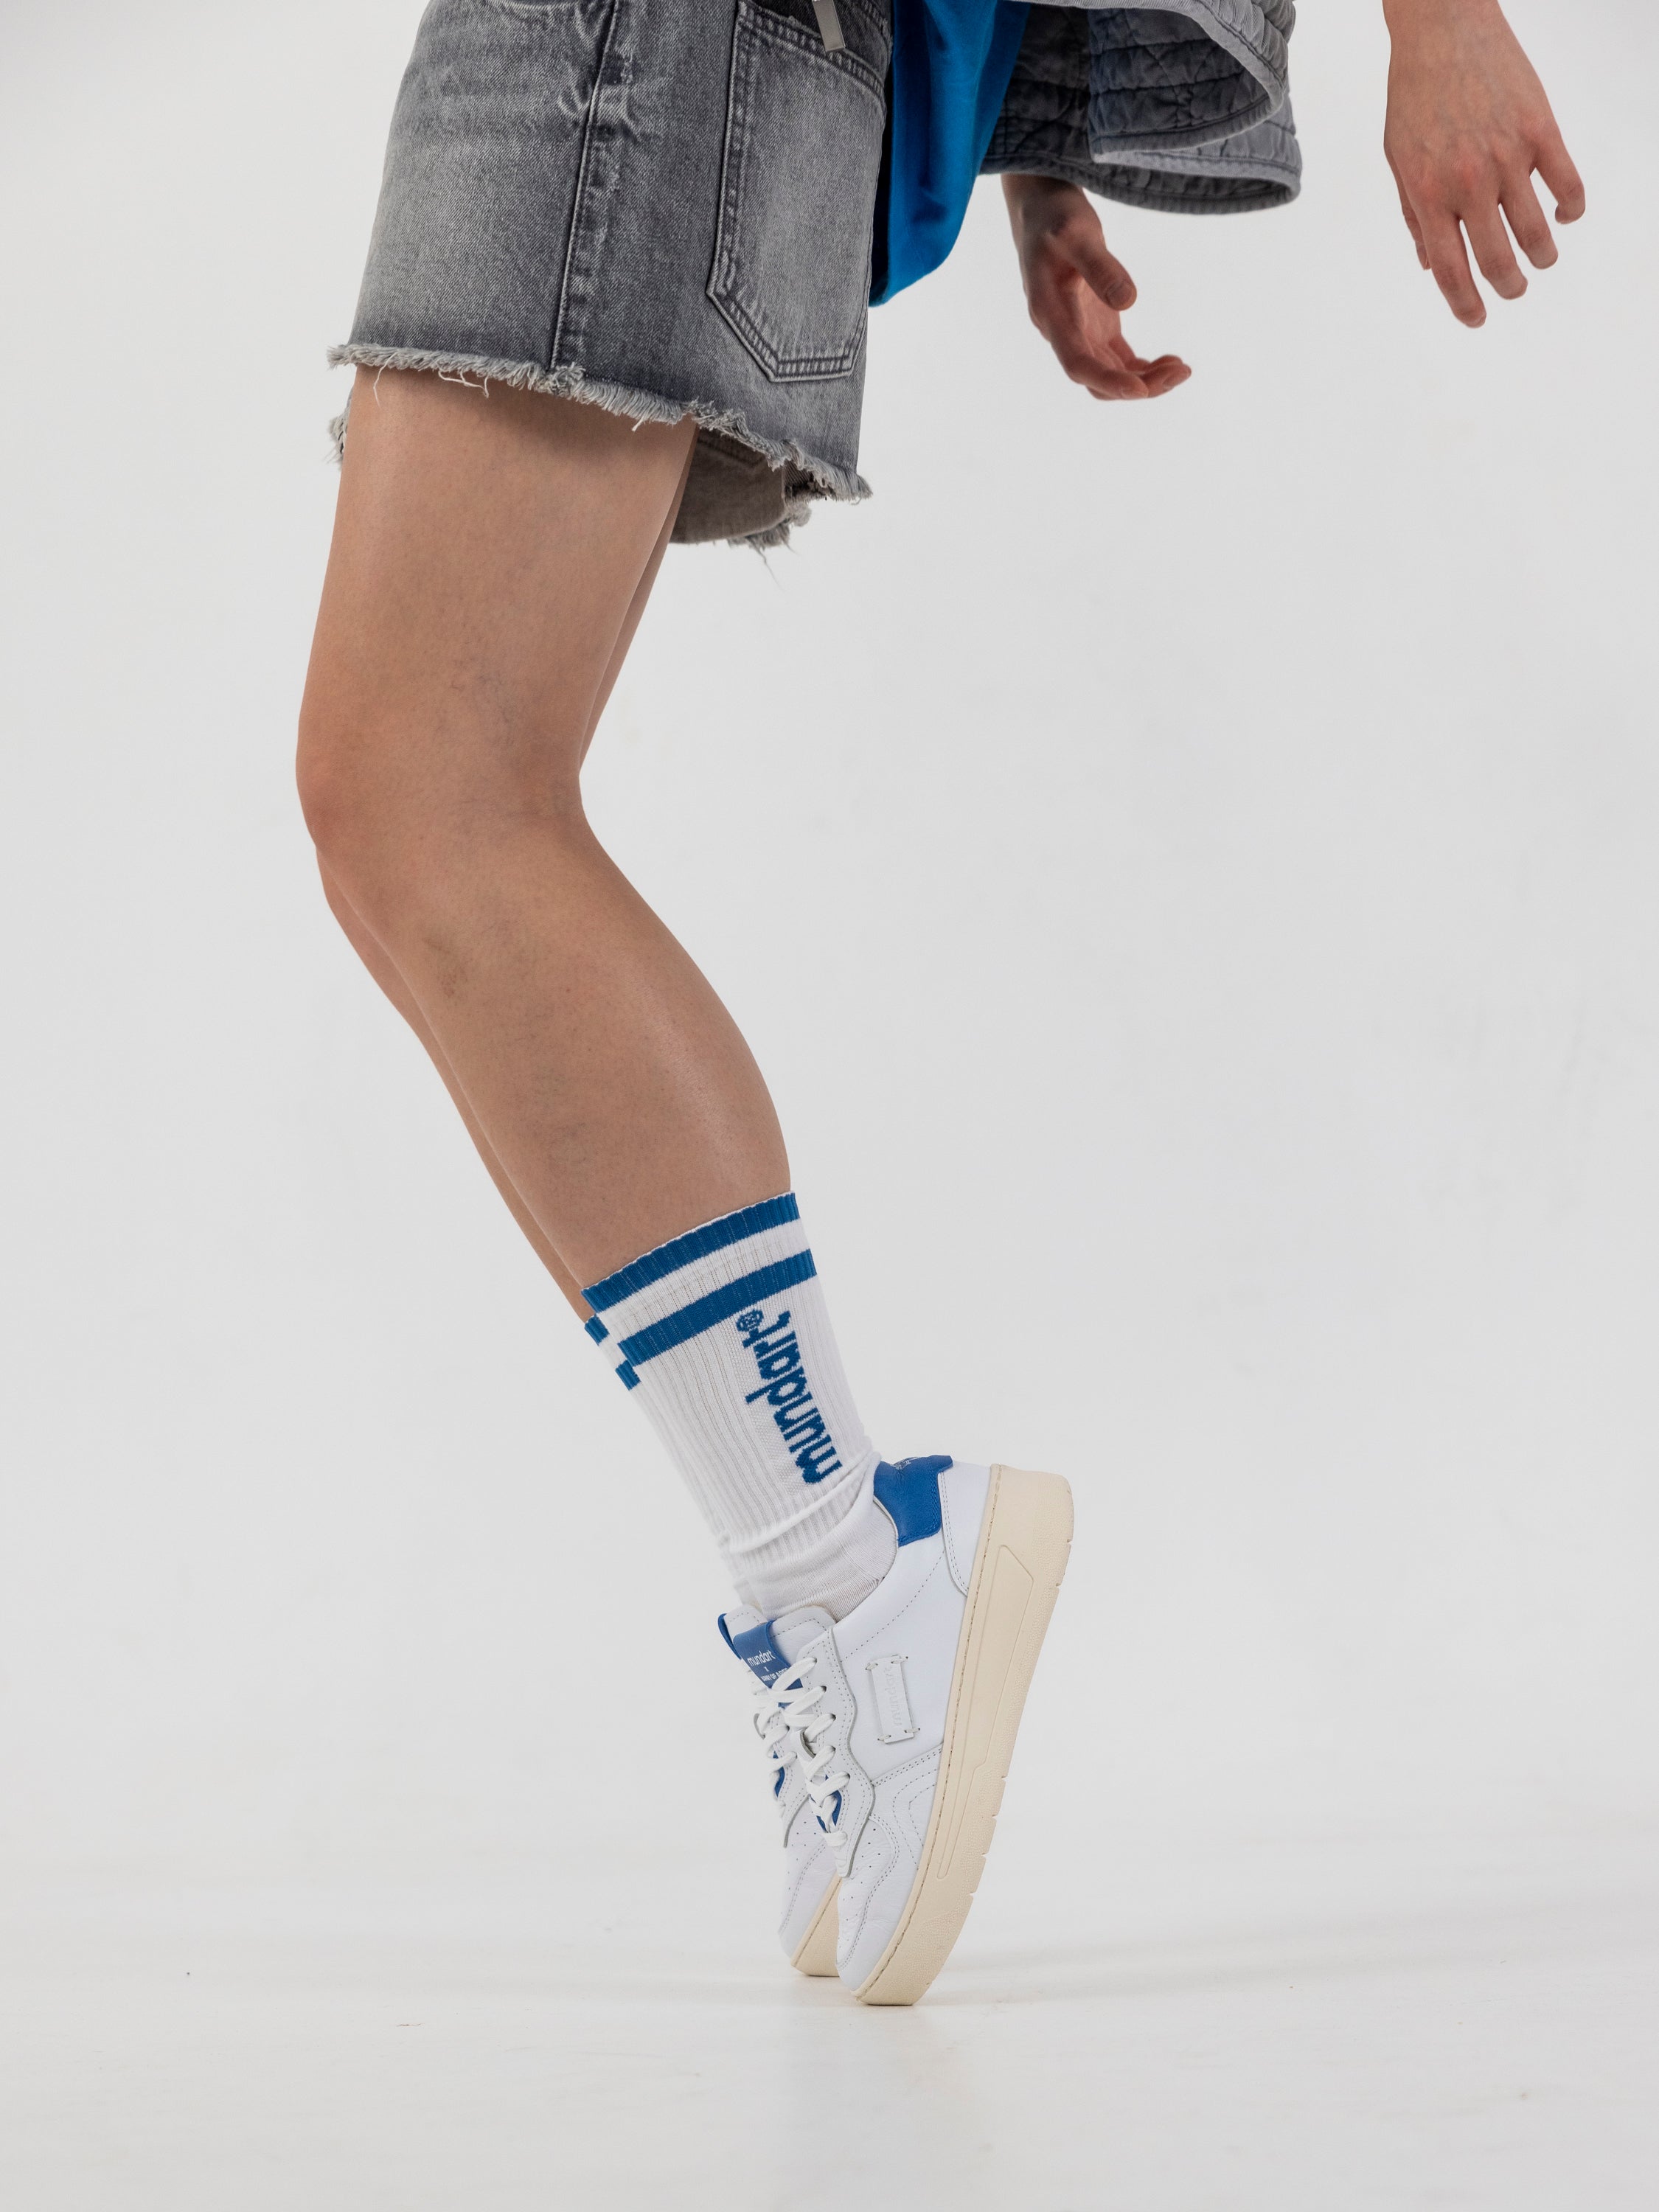 Sneaker Valle x Army of Apes White/Blue - made in spain